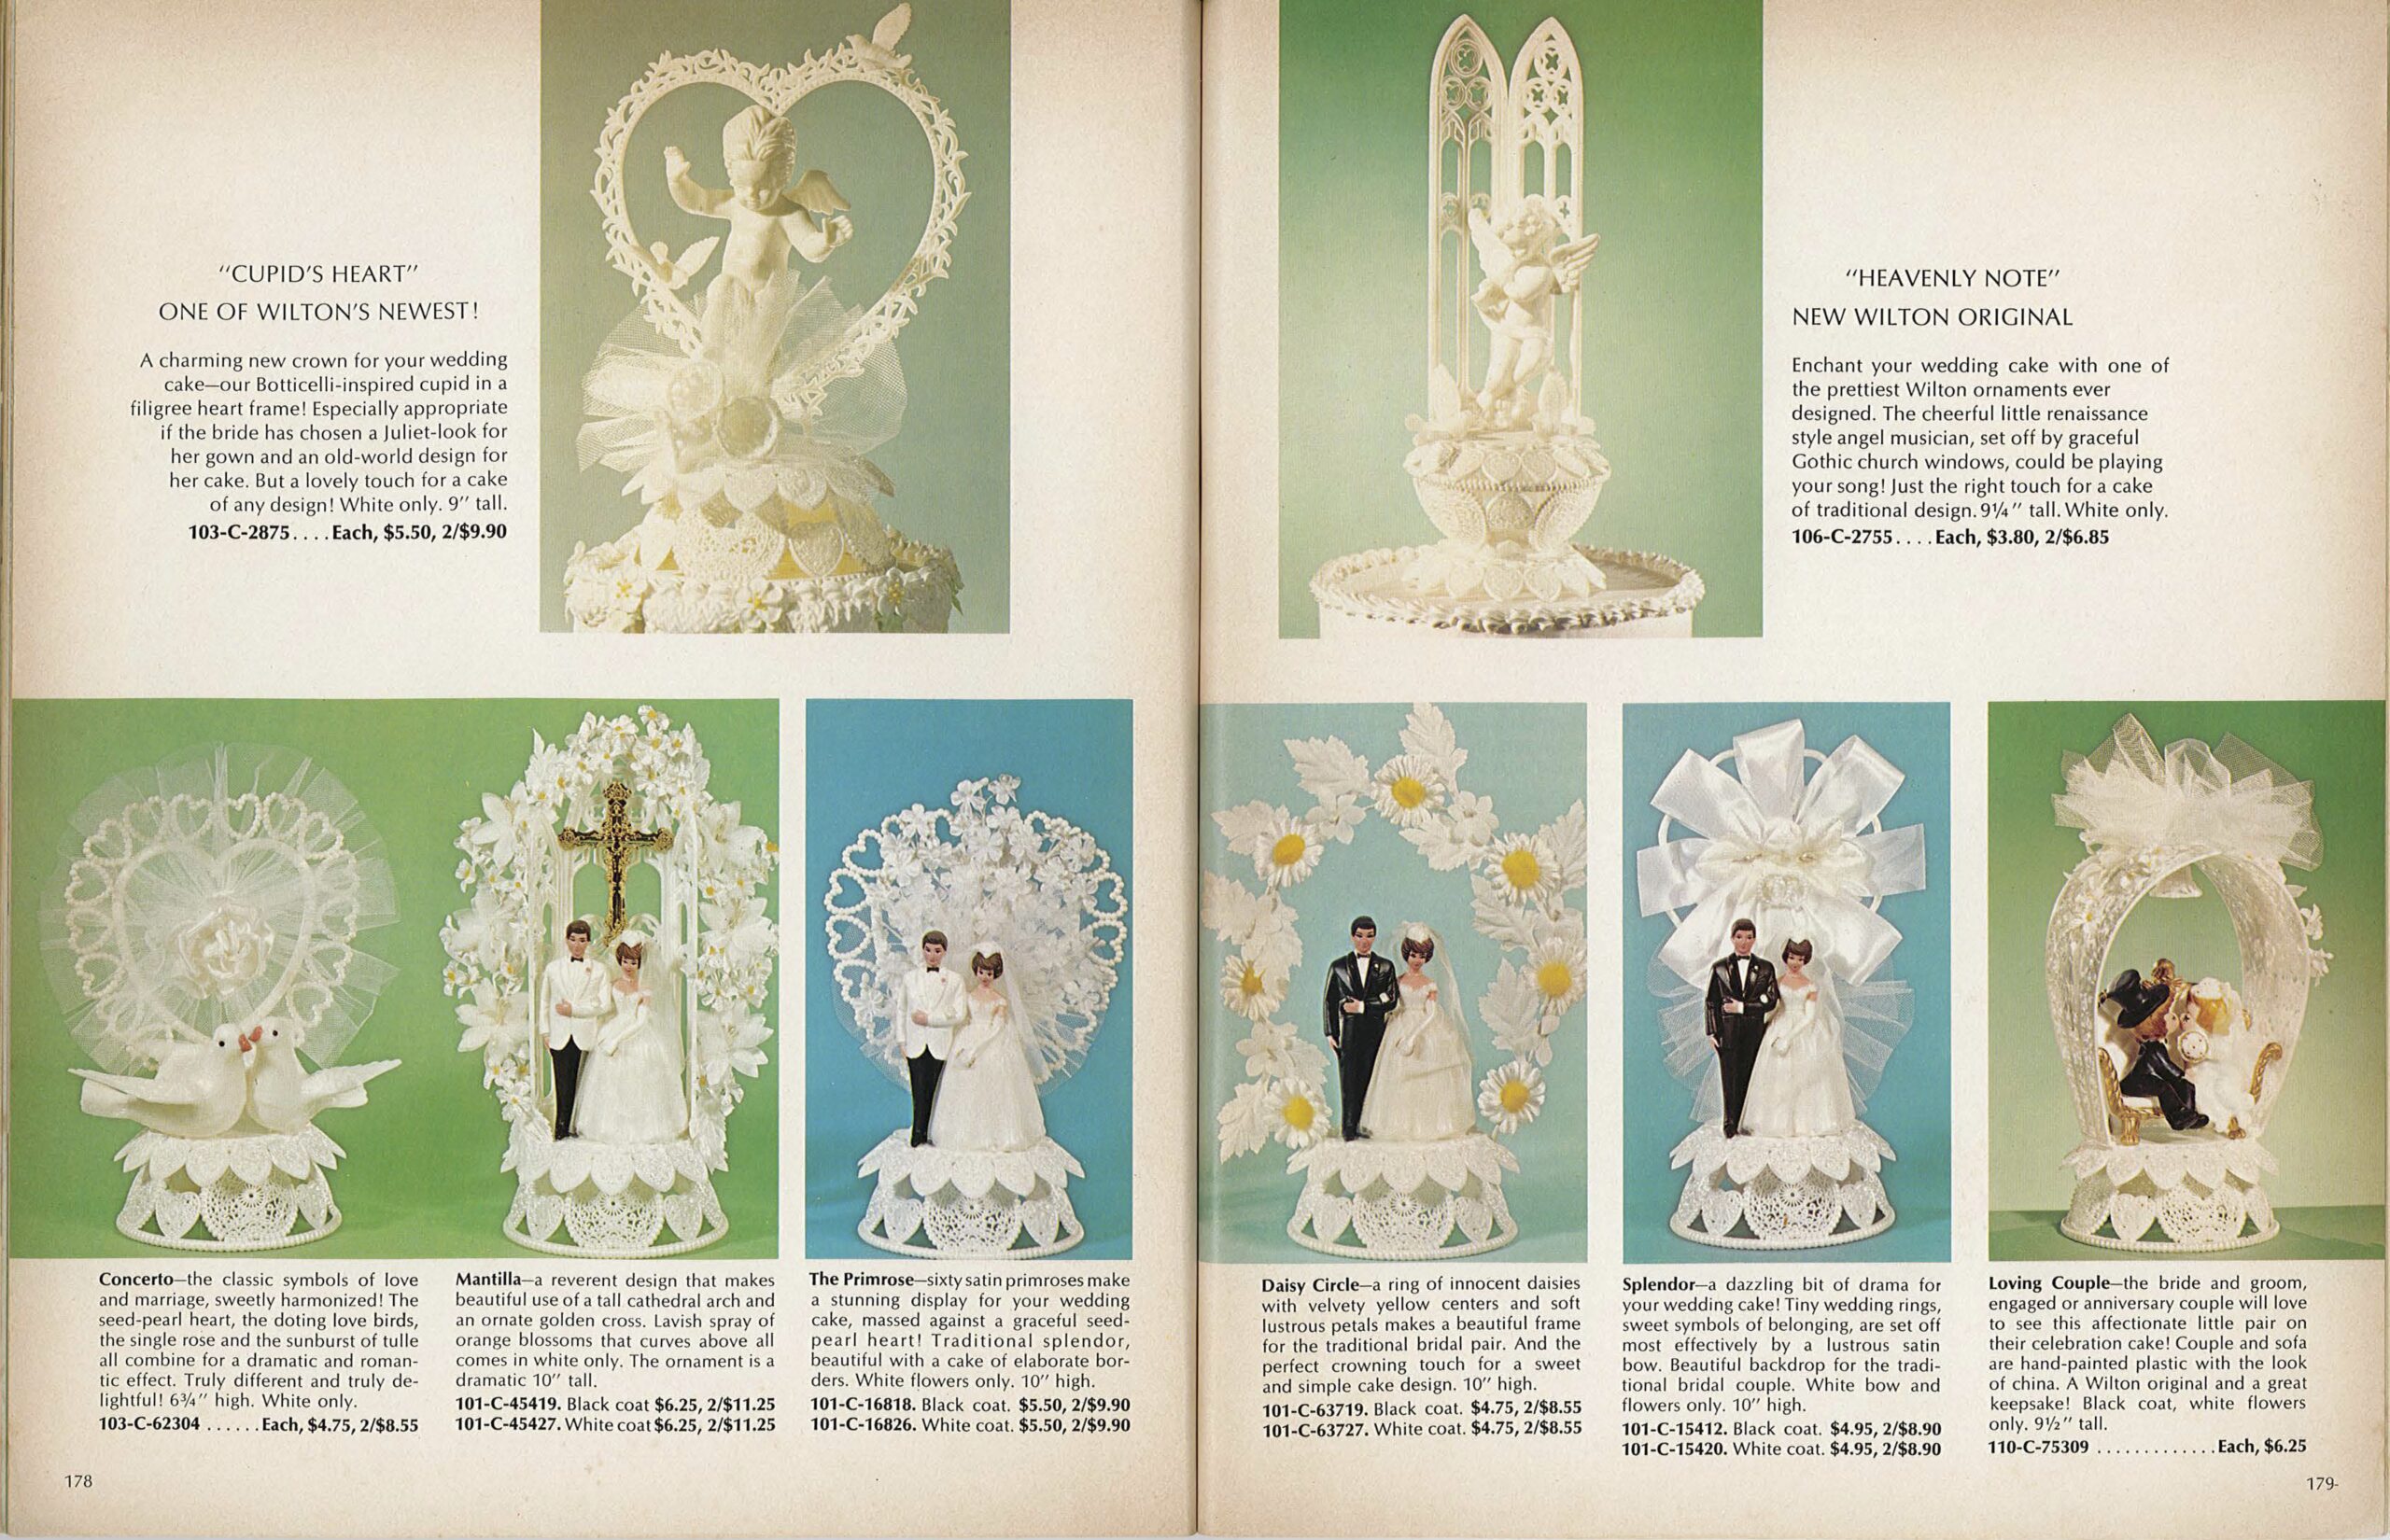 A calalog layout with several pairs of brides and grooms in white arbors